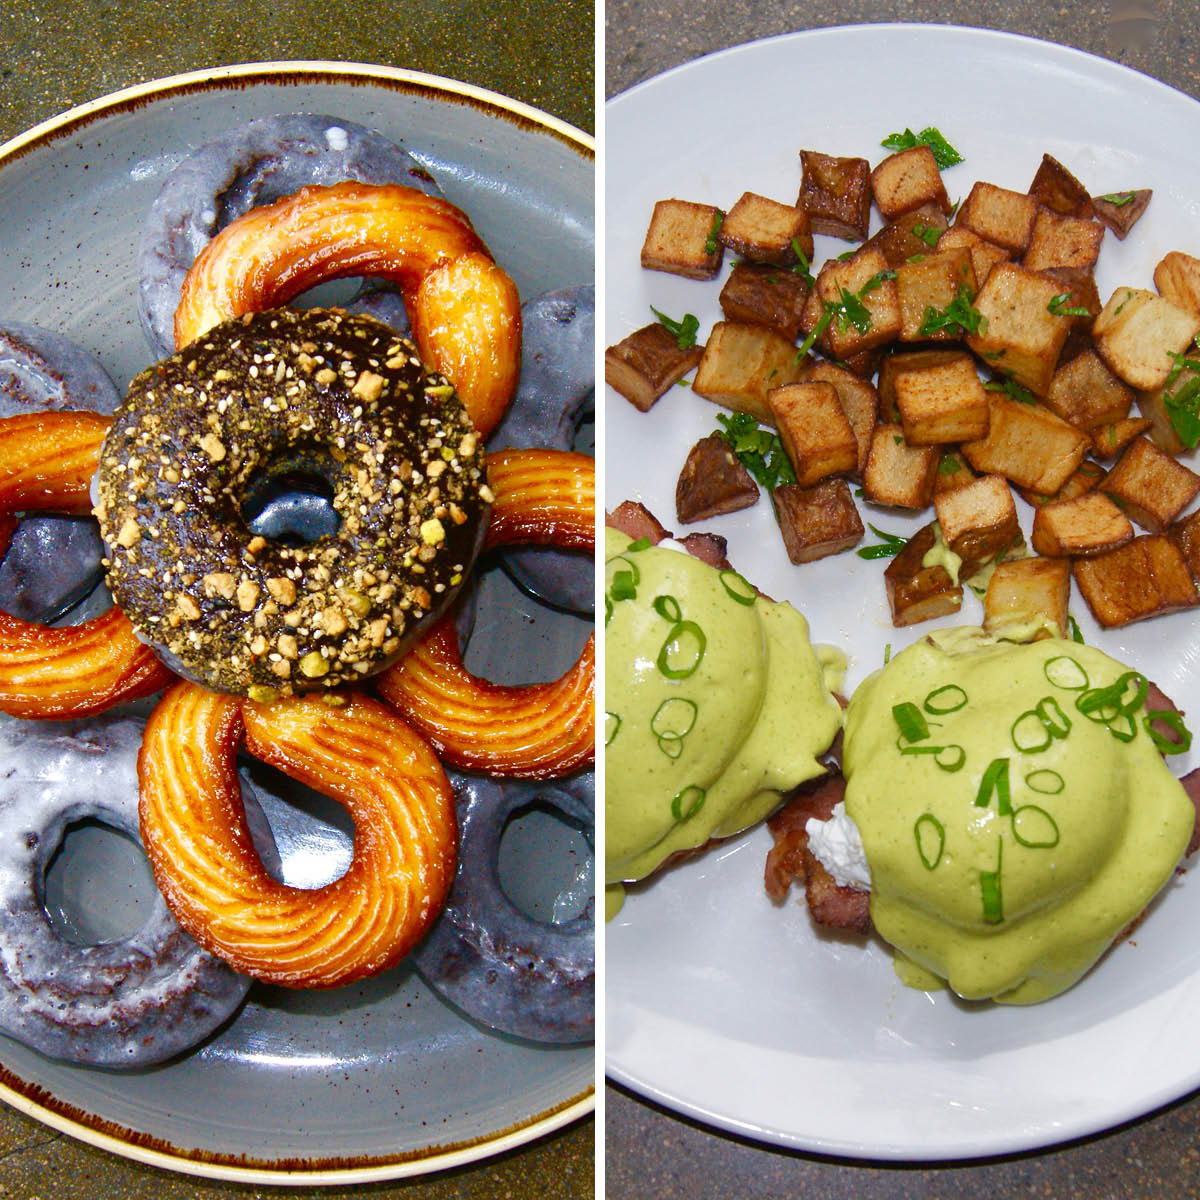 A selection of doughnuts and Green Eggs + Ham Benedict at Trade brunch